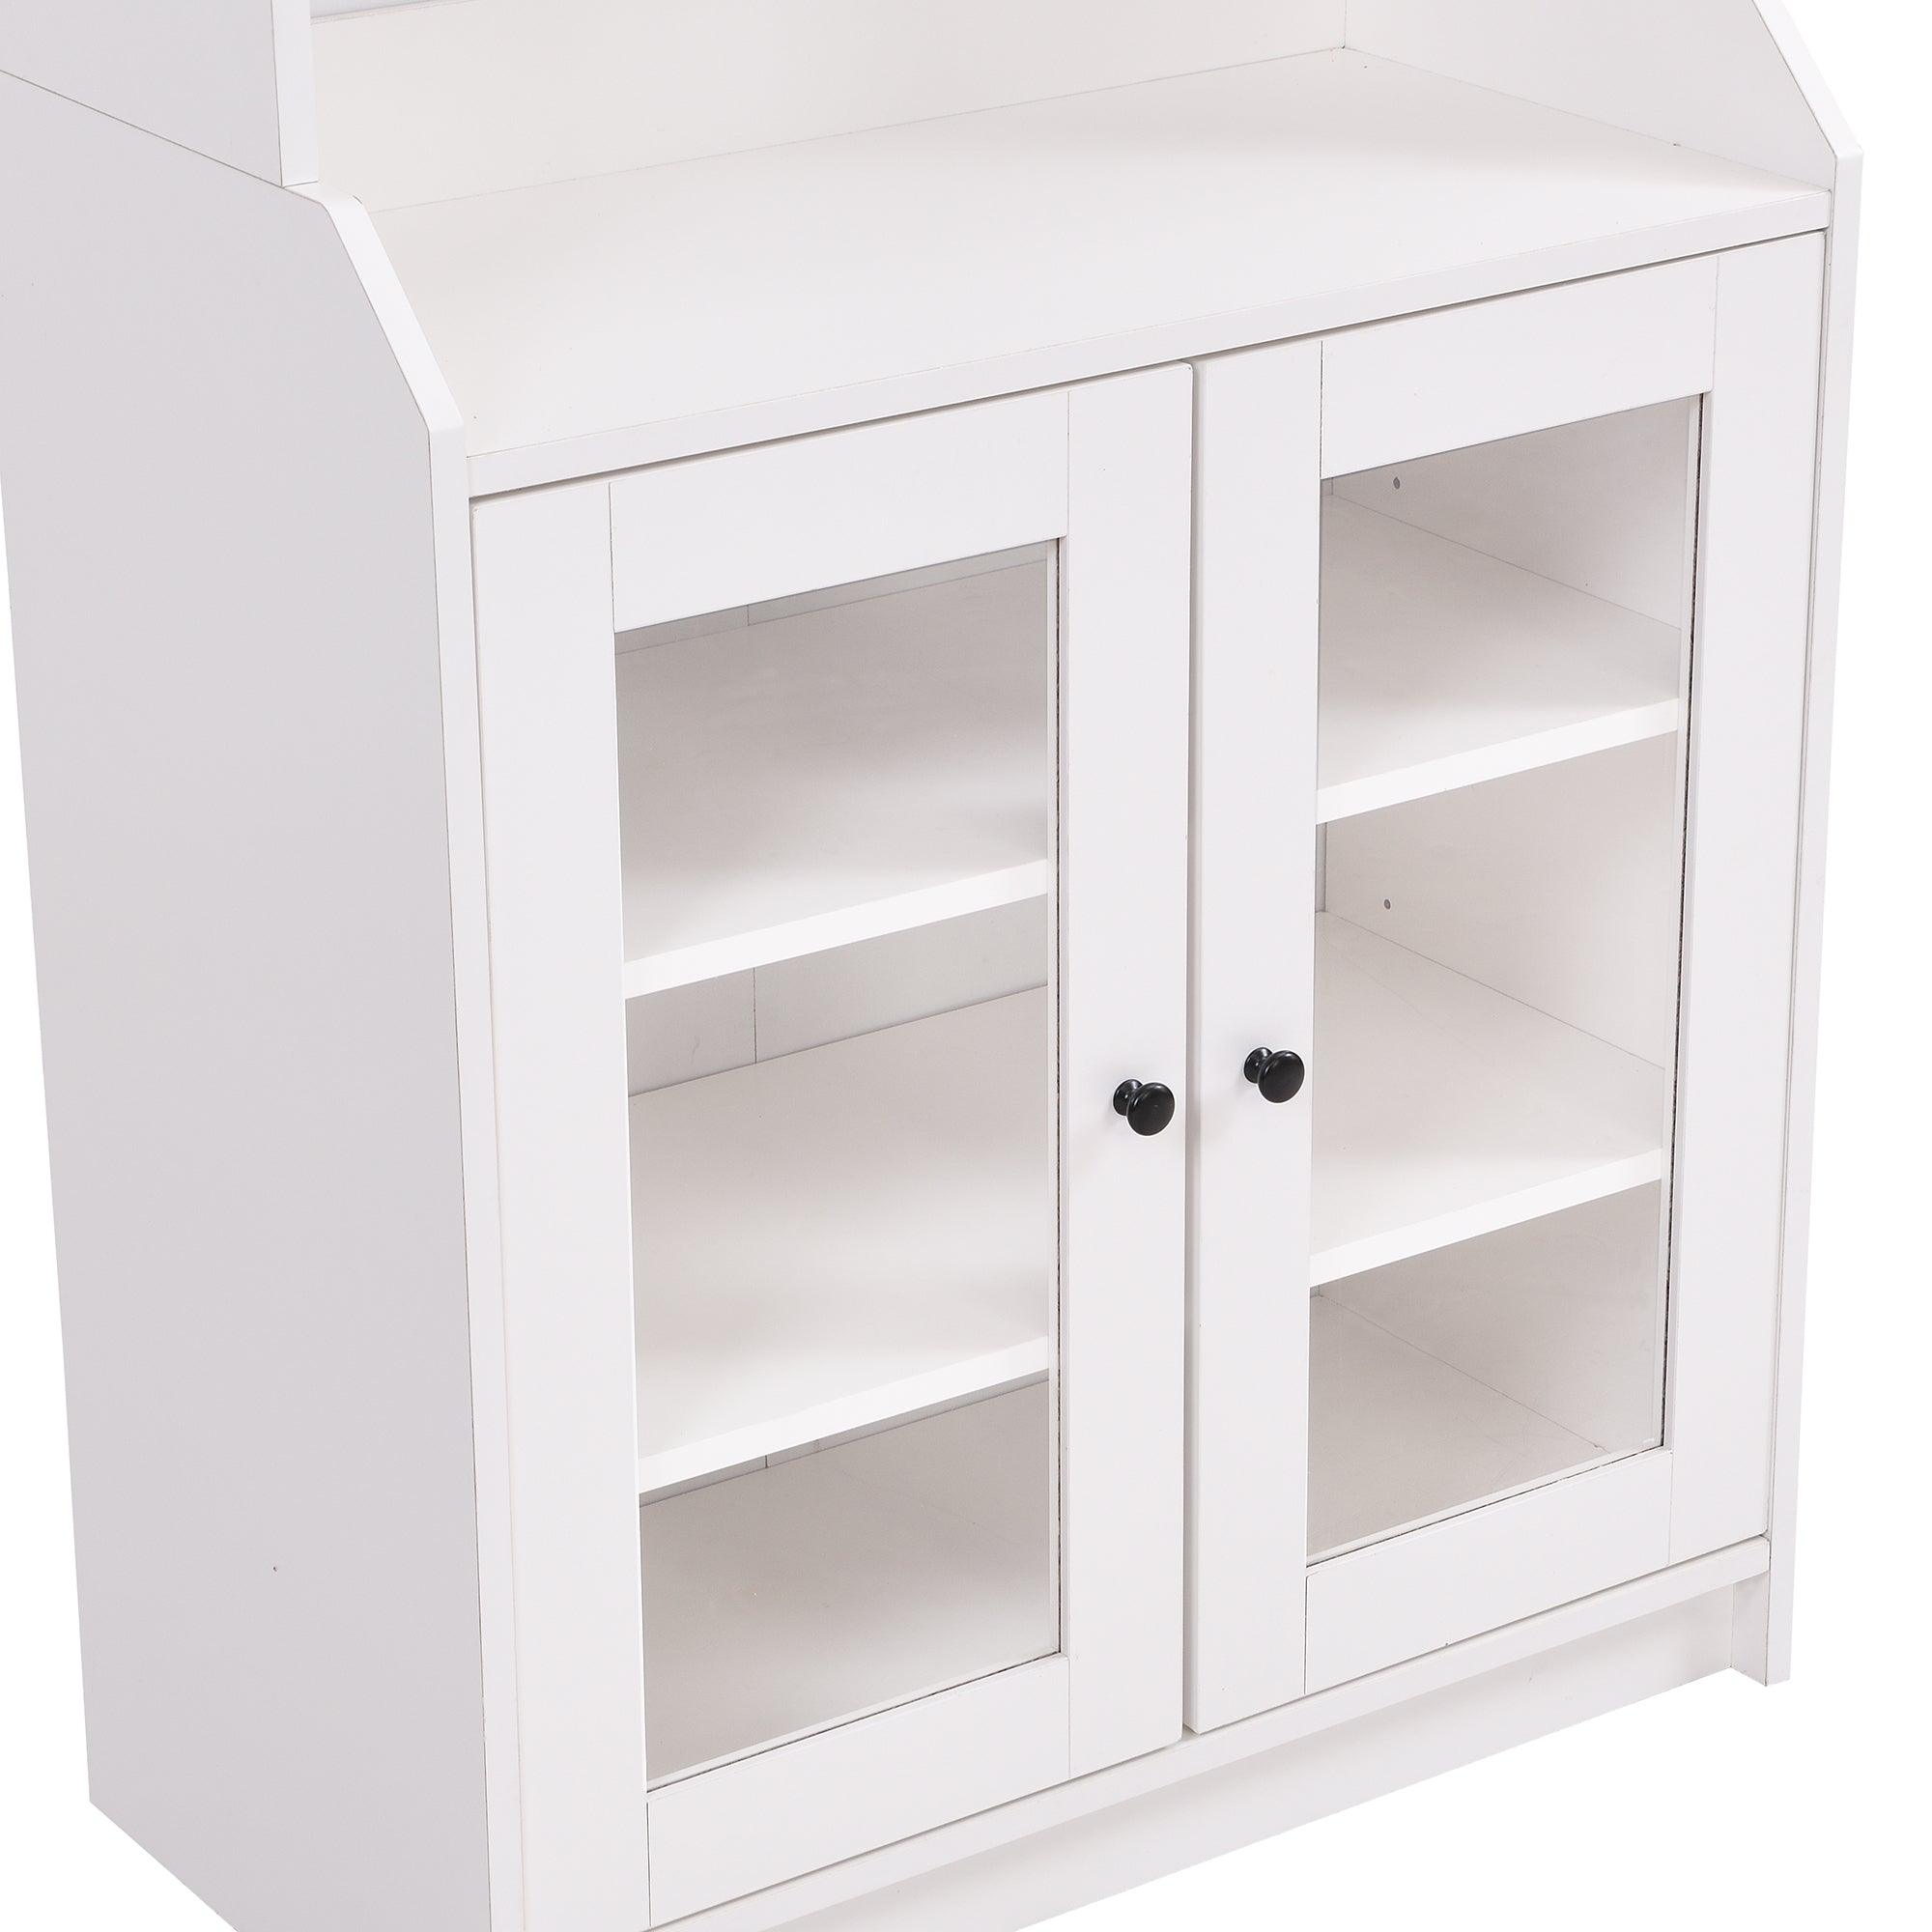 Elegant Tall Cabinet With Acrylic Board Door, Versatile Sideboard With Graceful Curves, Contemporary Bookshelf With Adjustable Shelves For Living Room, White